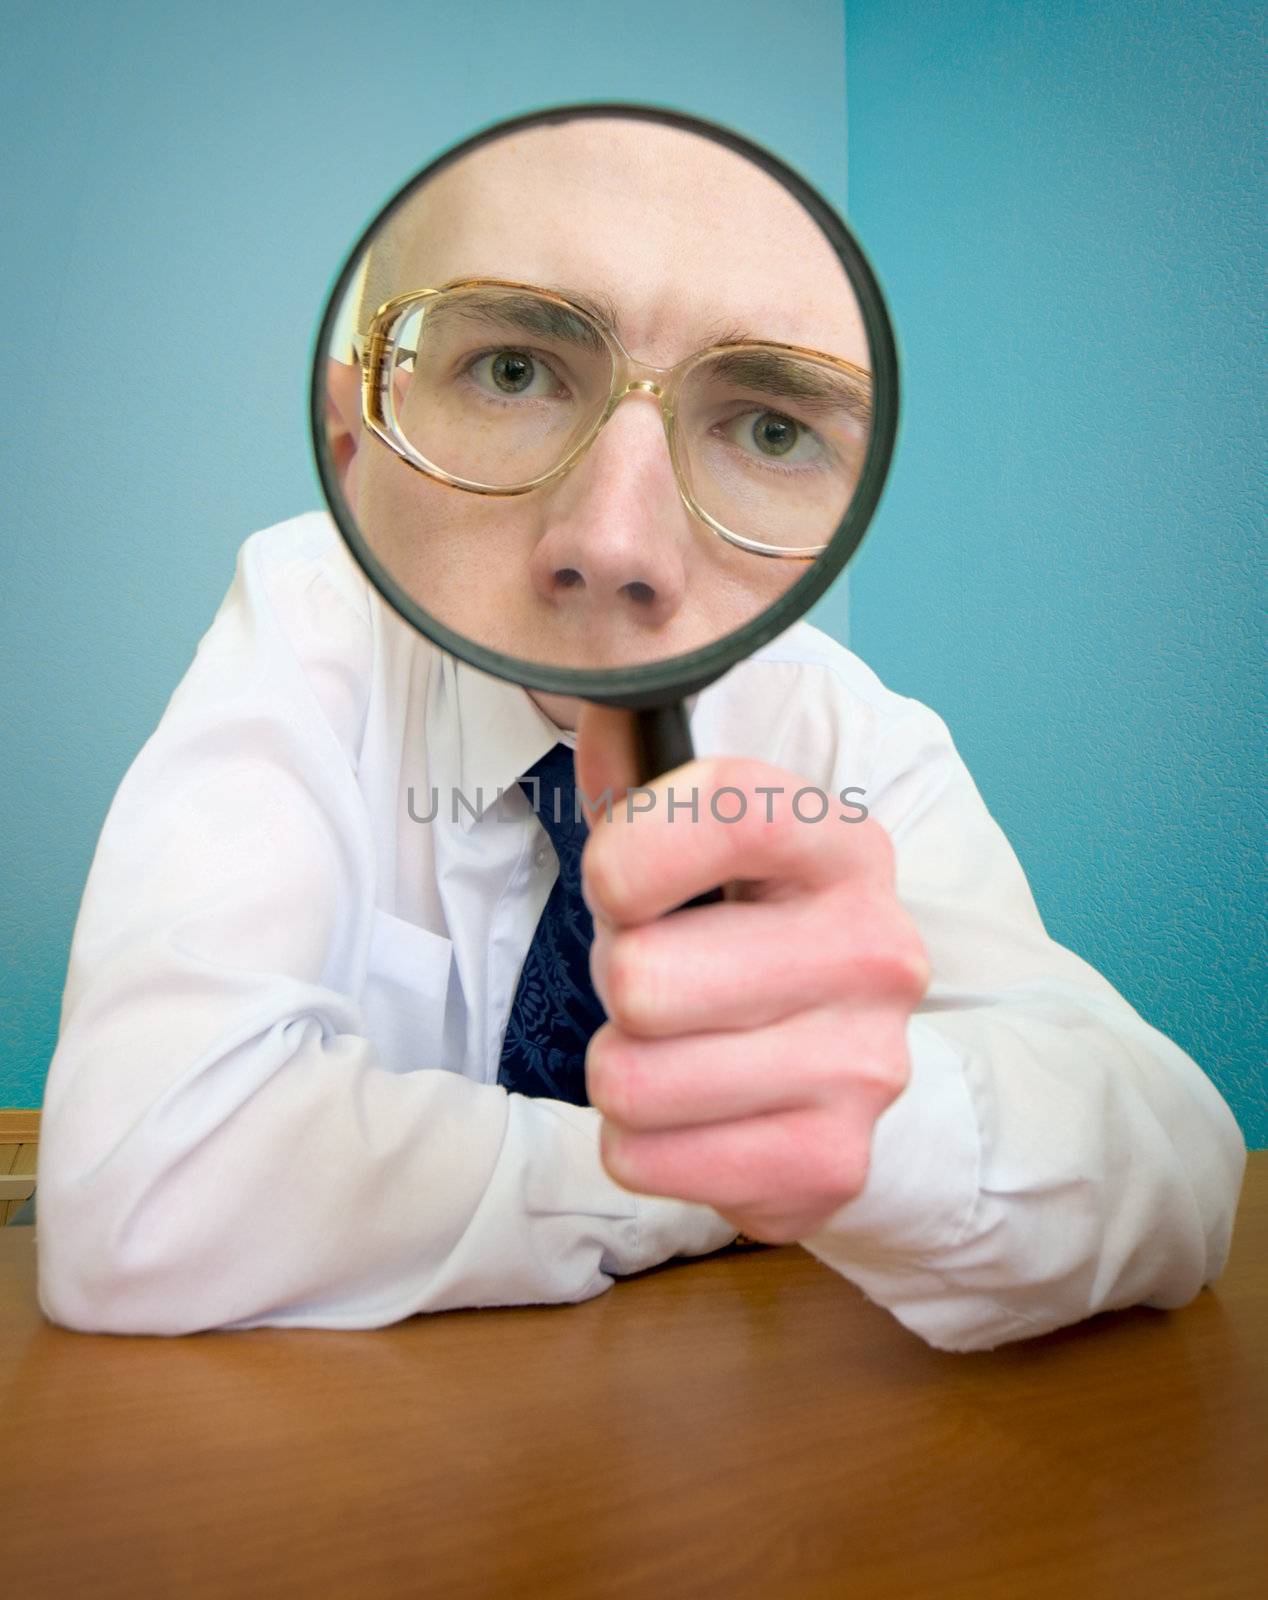 Funny people with a magnifier in a hand